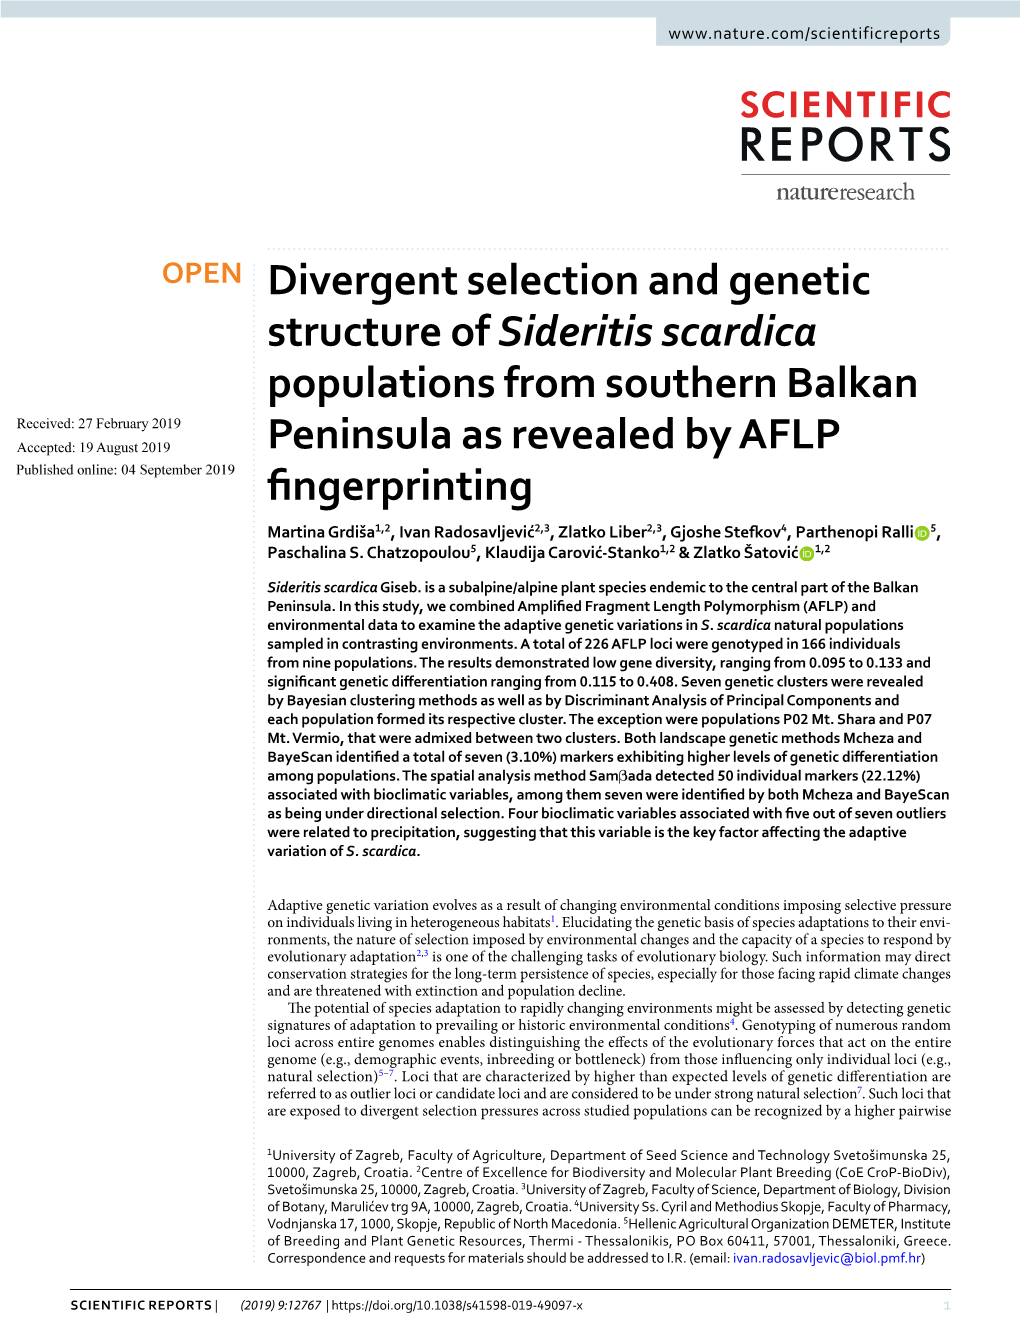 Divergent Selection and Genetic Structure of Sideritis